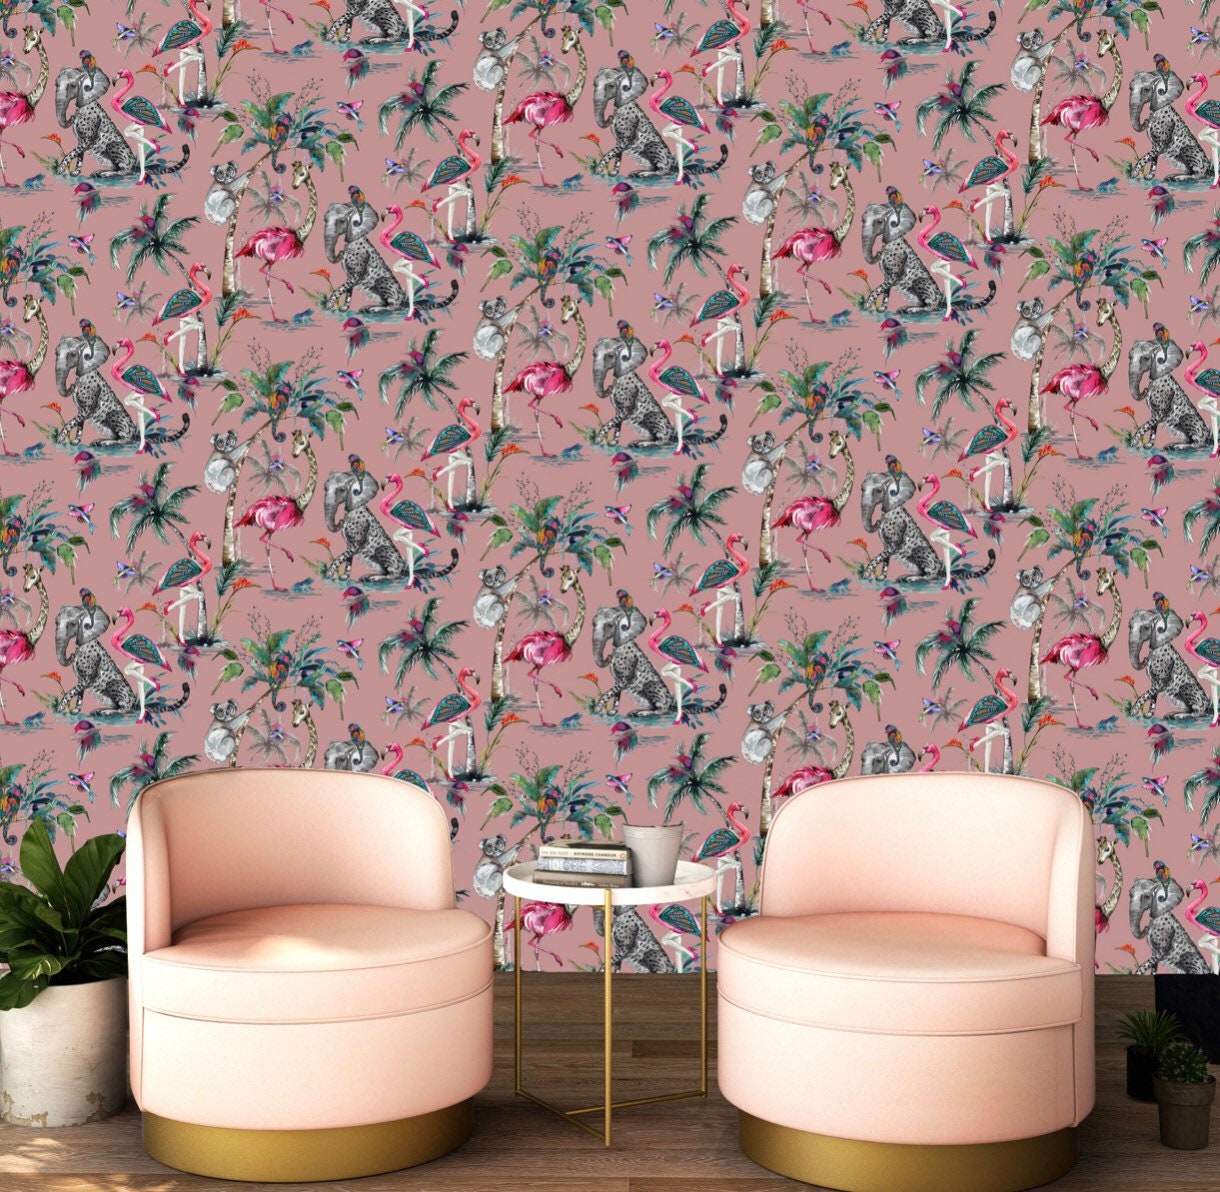 anthropologie-havenview-mural-wallpaper-dining-room-pink-green-preppy-historic-home-grandmillennial  - The Glam Pad